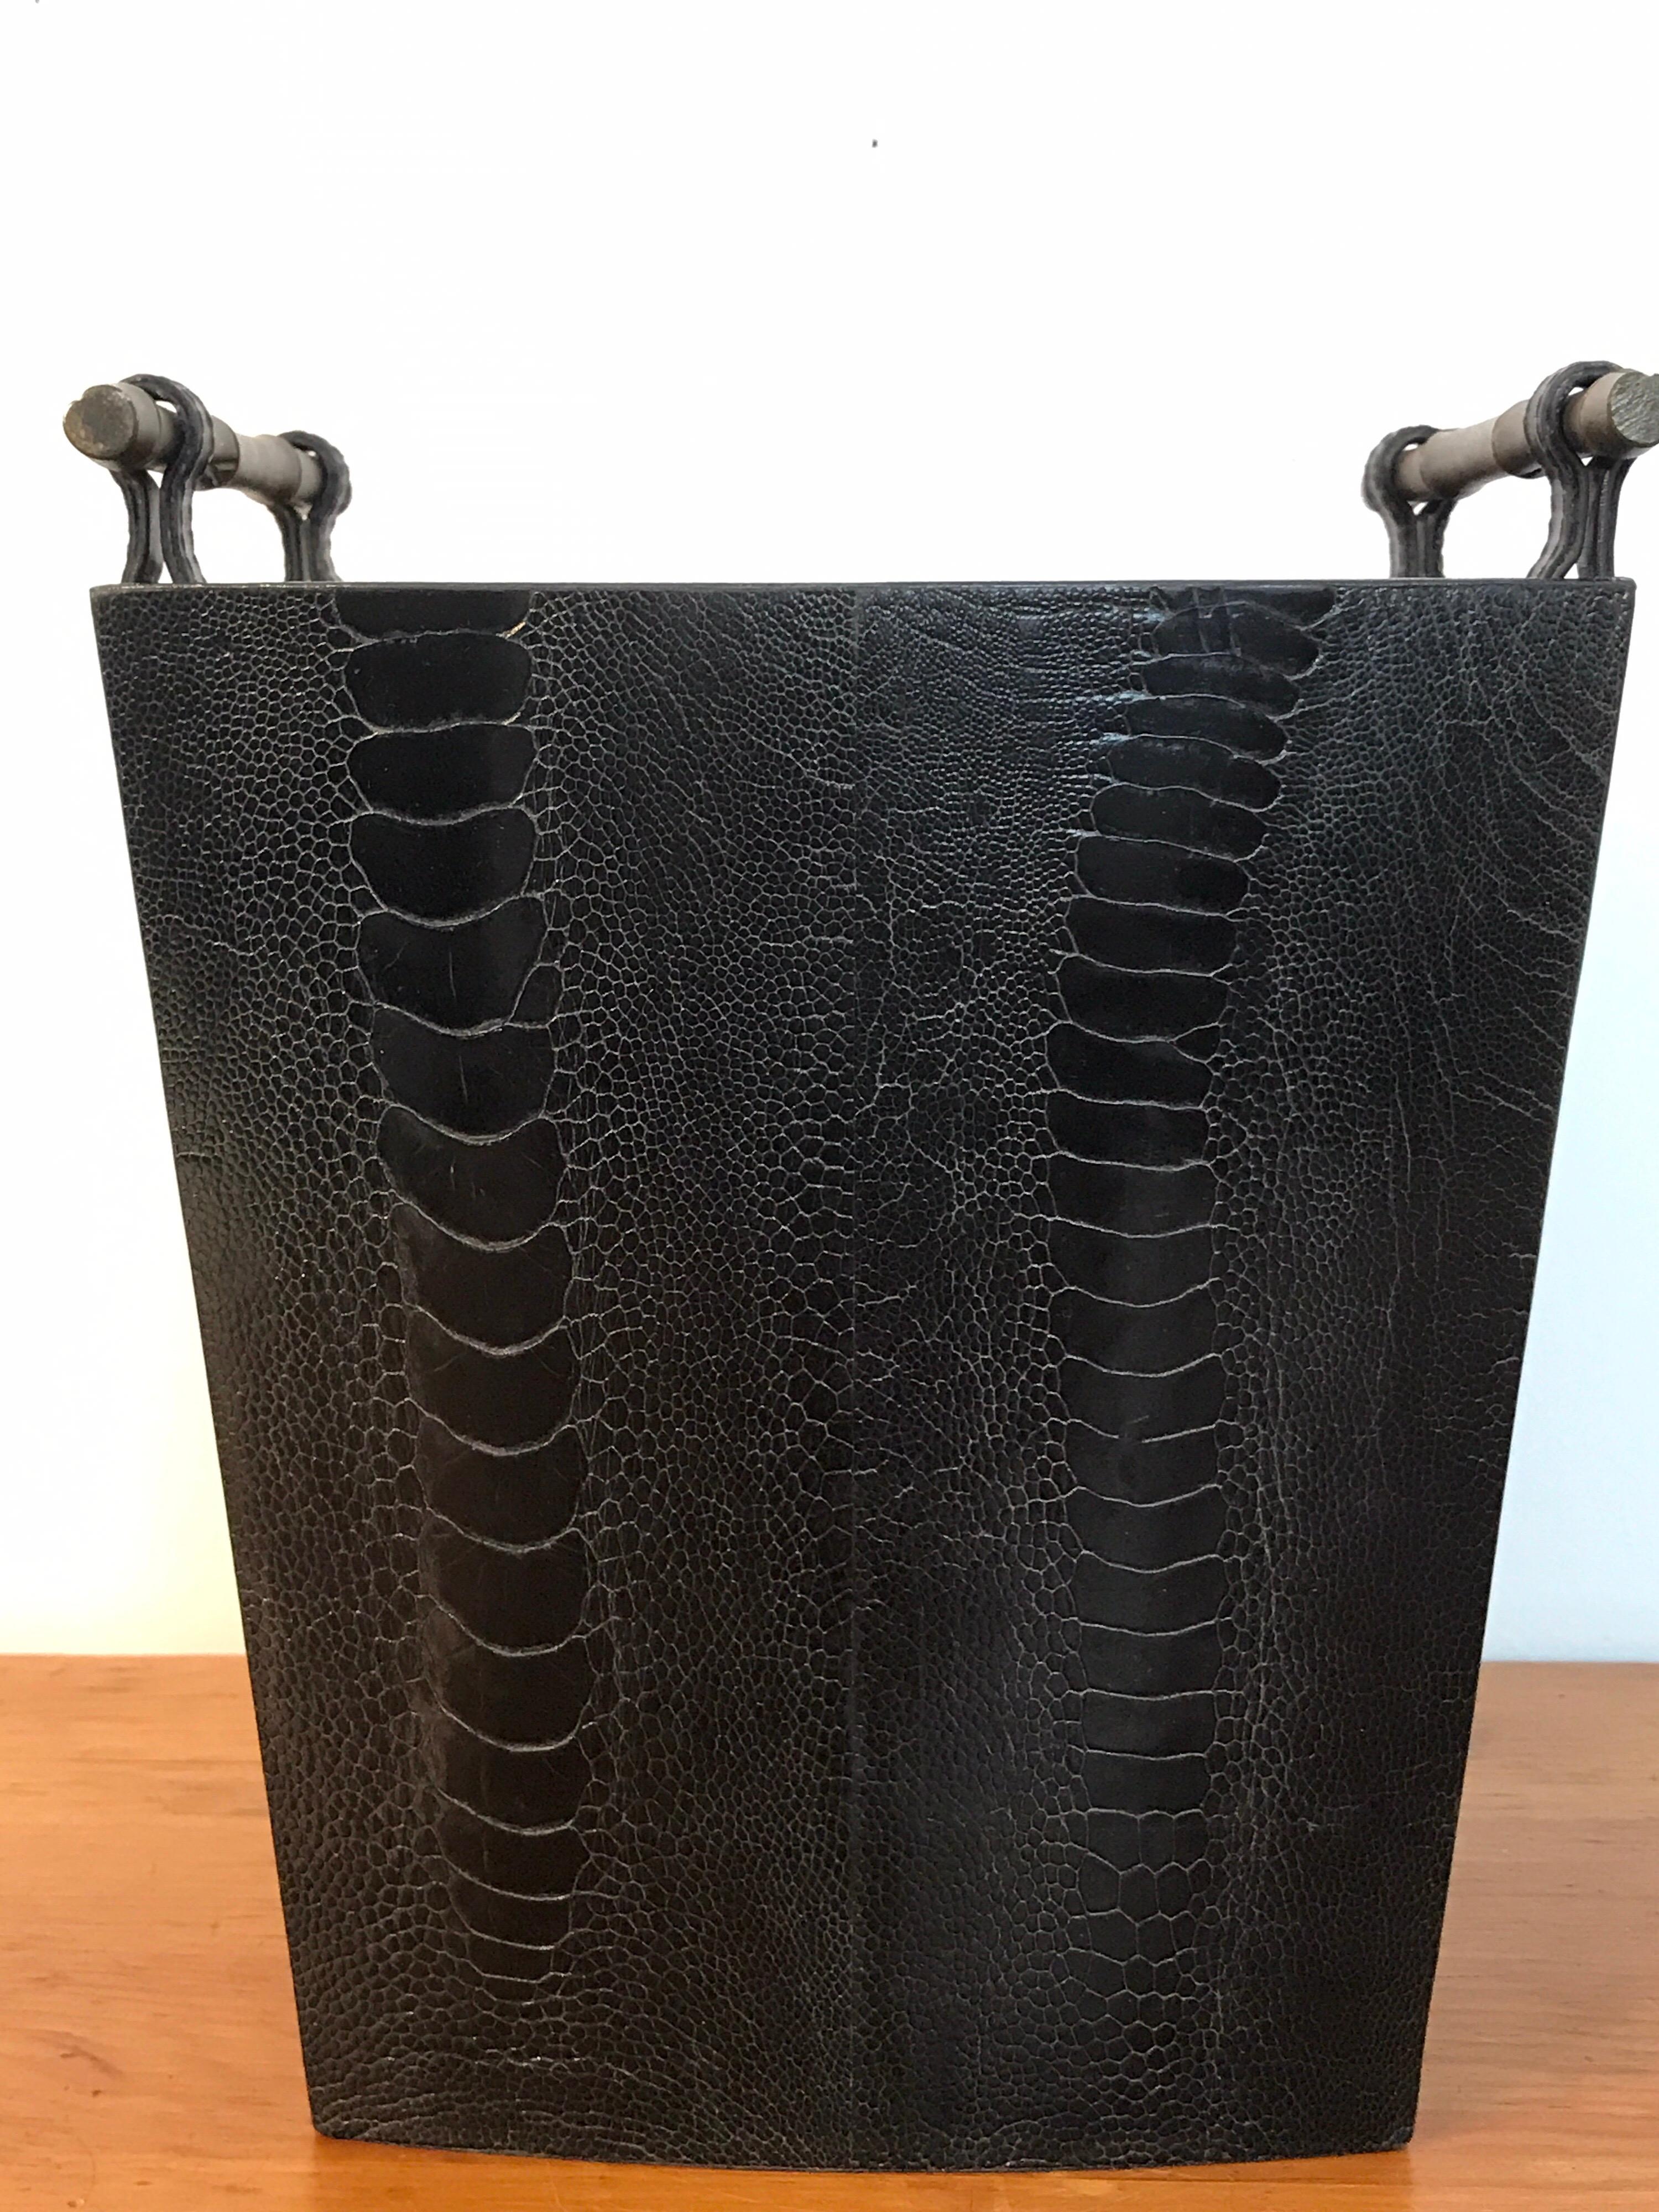 French modern snakeskin wastepaper basket, by R&Y Augousti, exquisitely detailed with bookmatched snakeskin, leather straps and cast bronze faux bamboo handles. 12